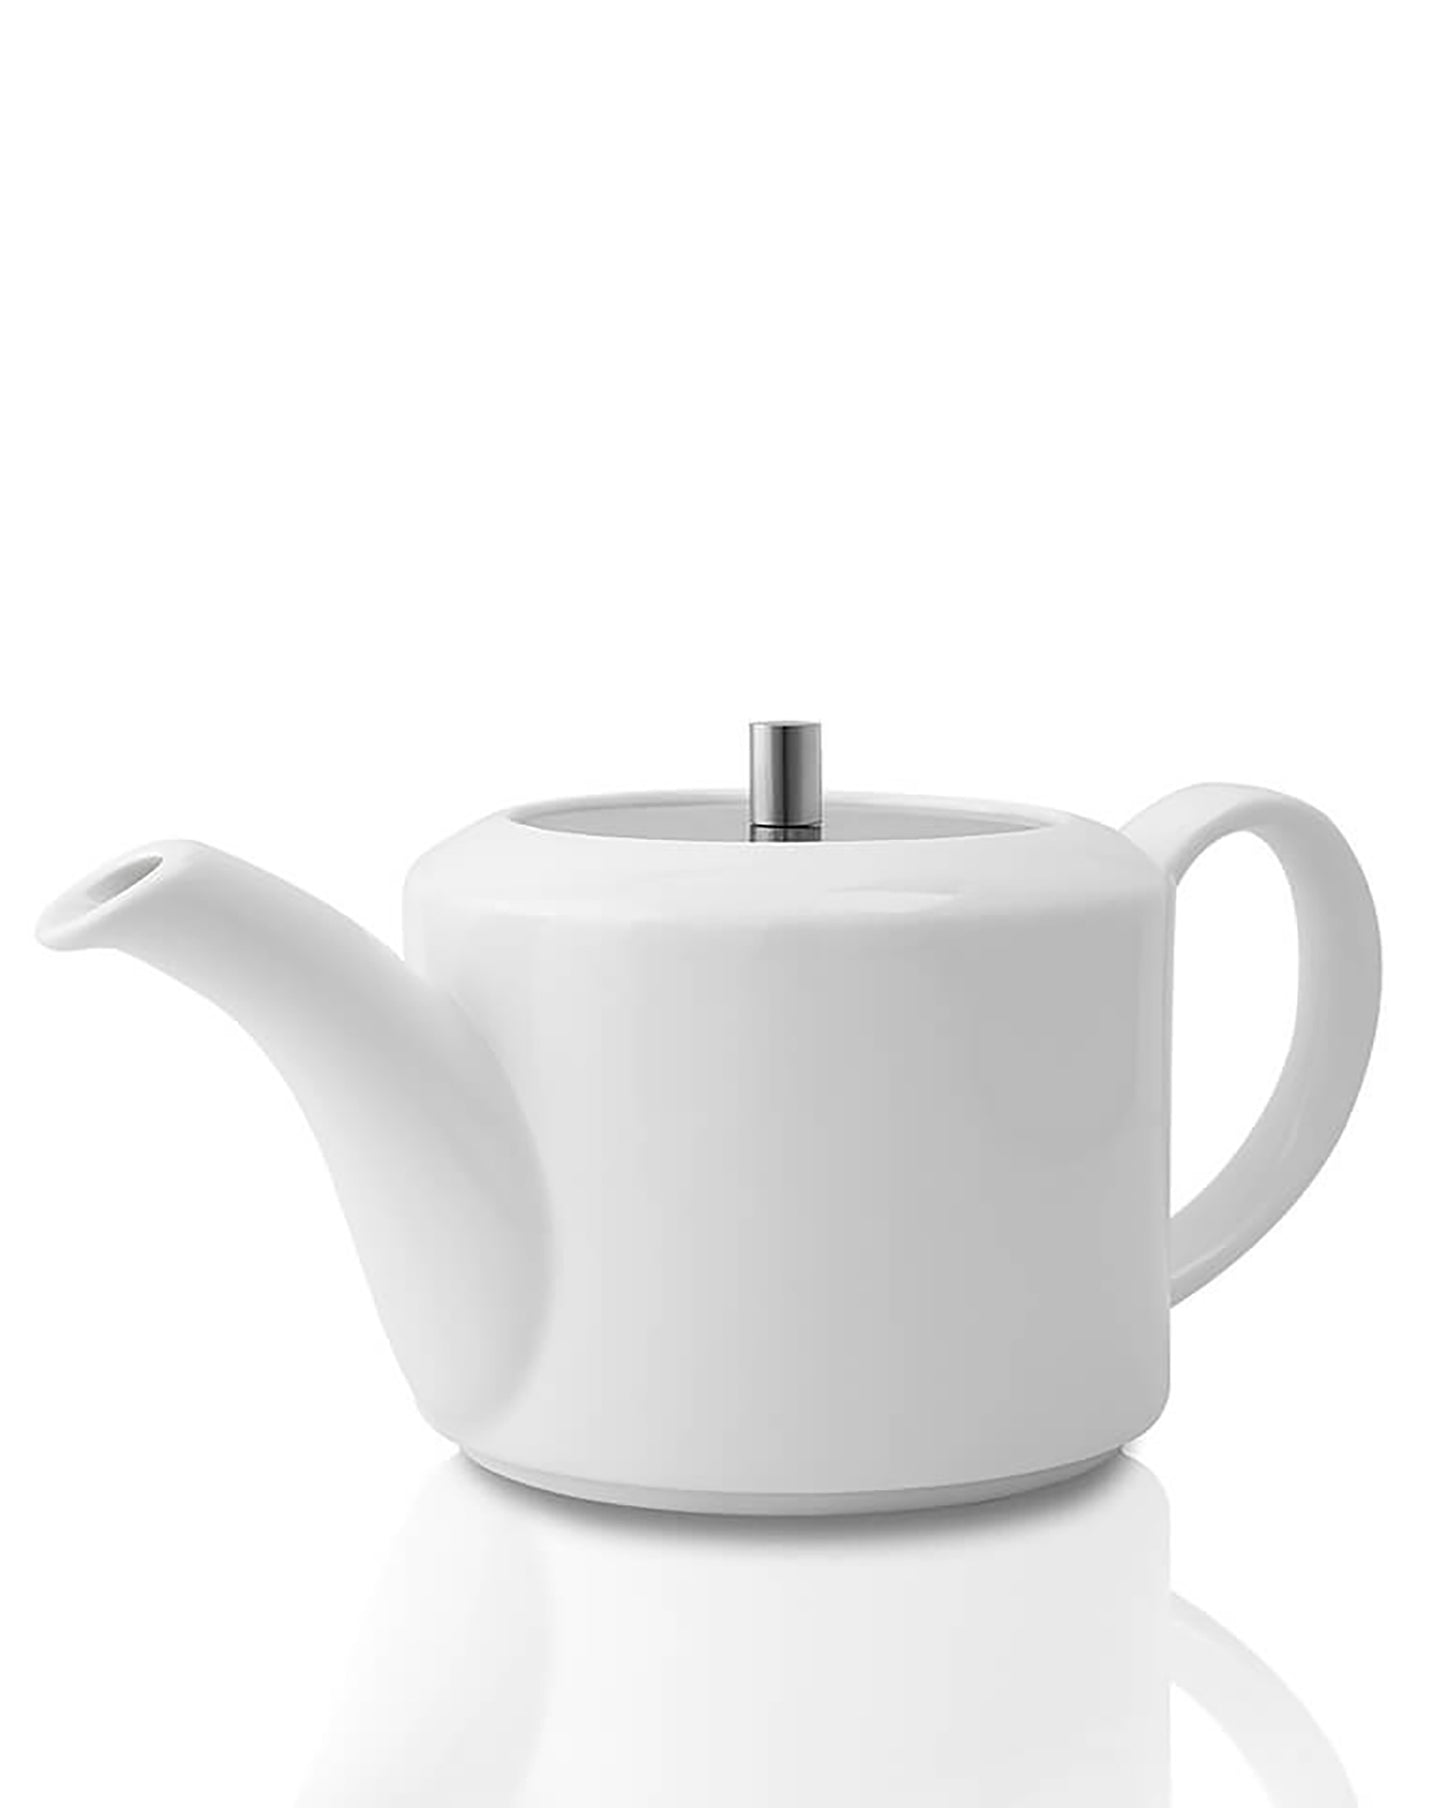 White Fine Porcelain Ancient Spring Tea kettle with steel lid, Bone china pot for morning tea, coffee, drink